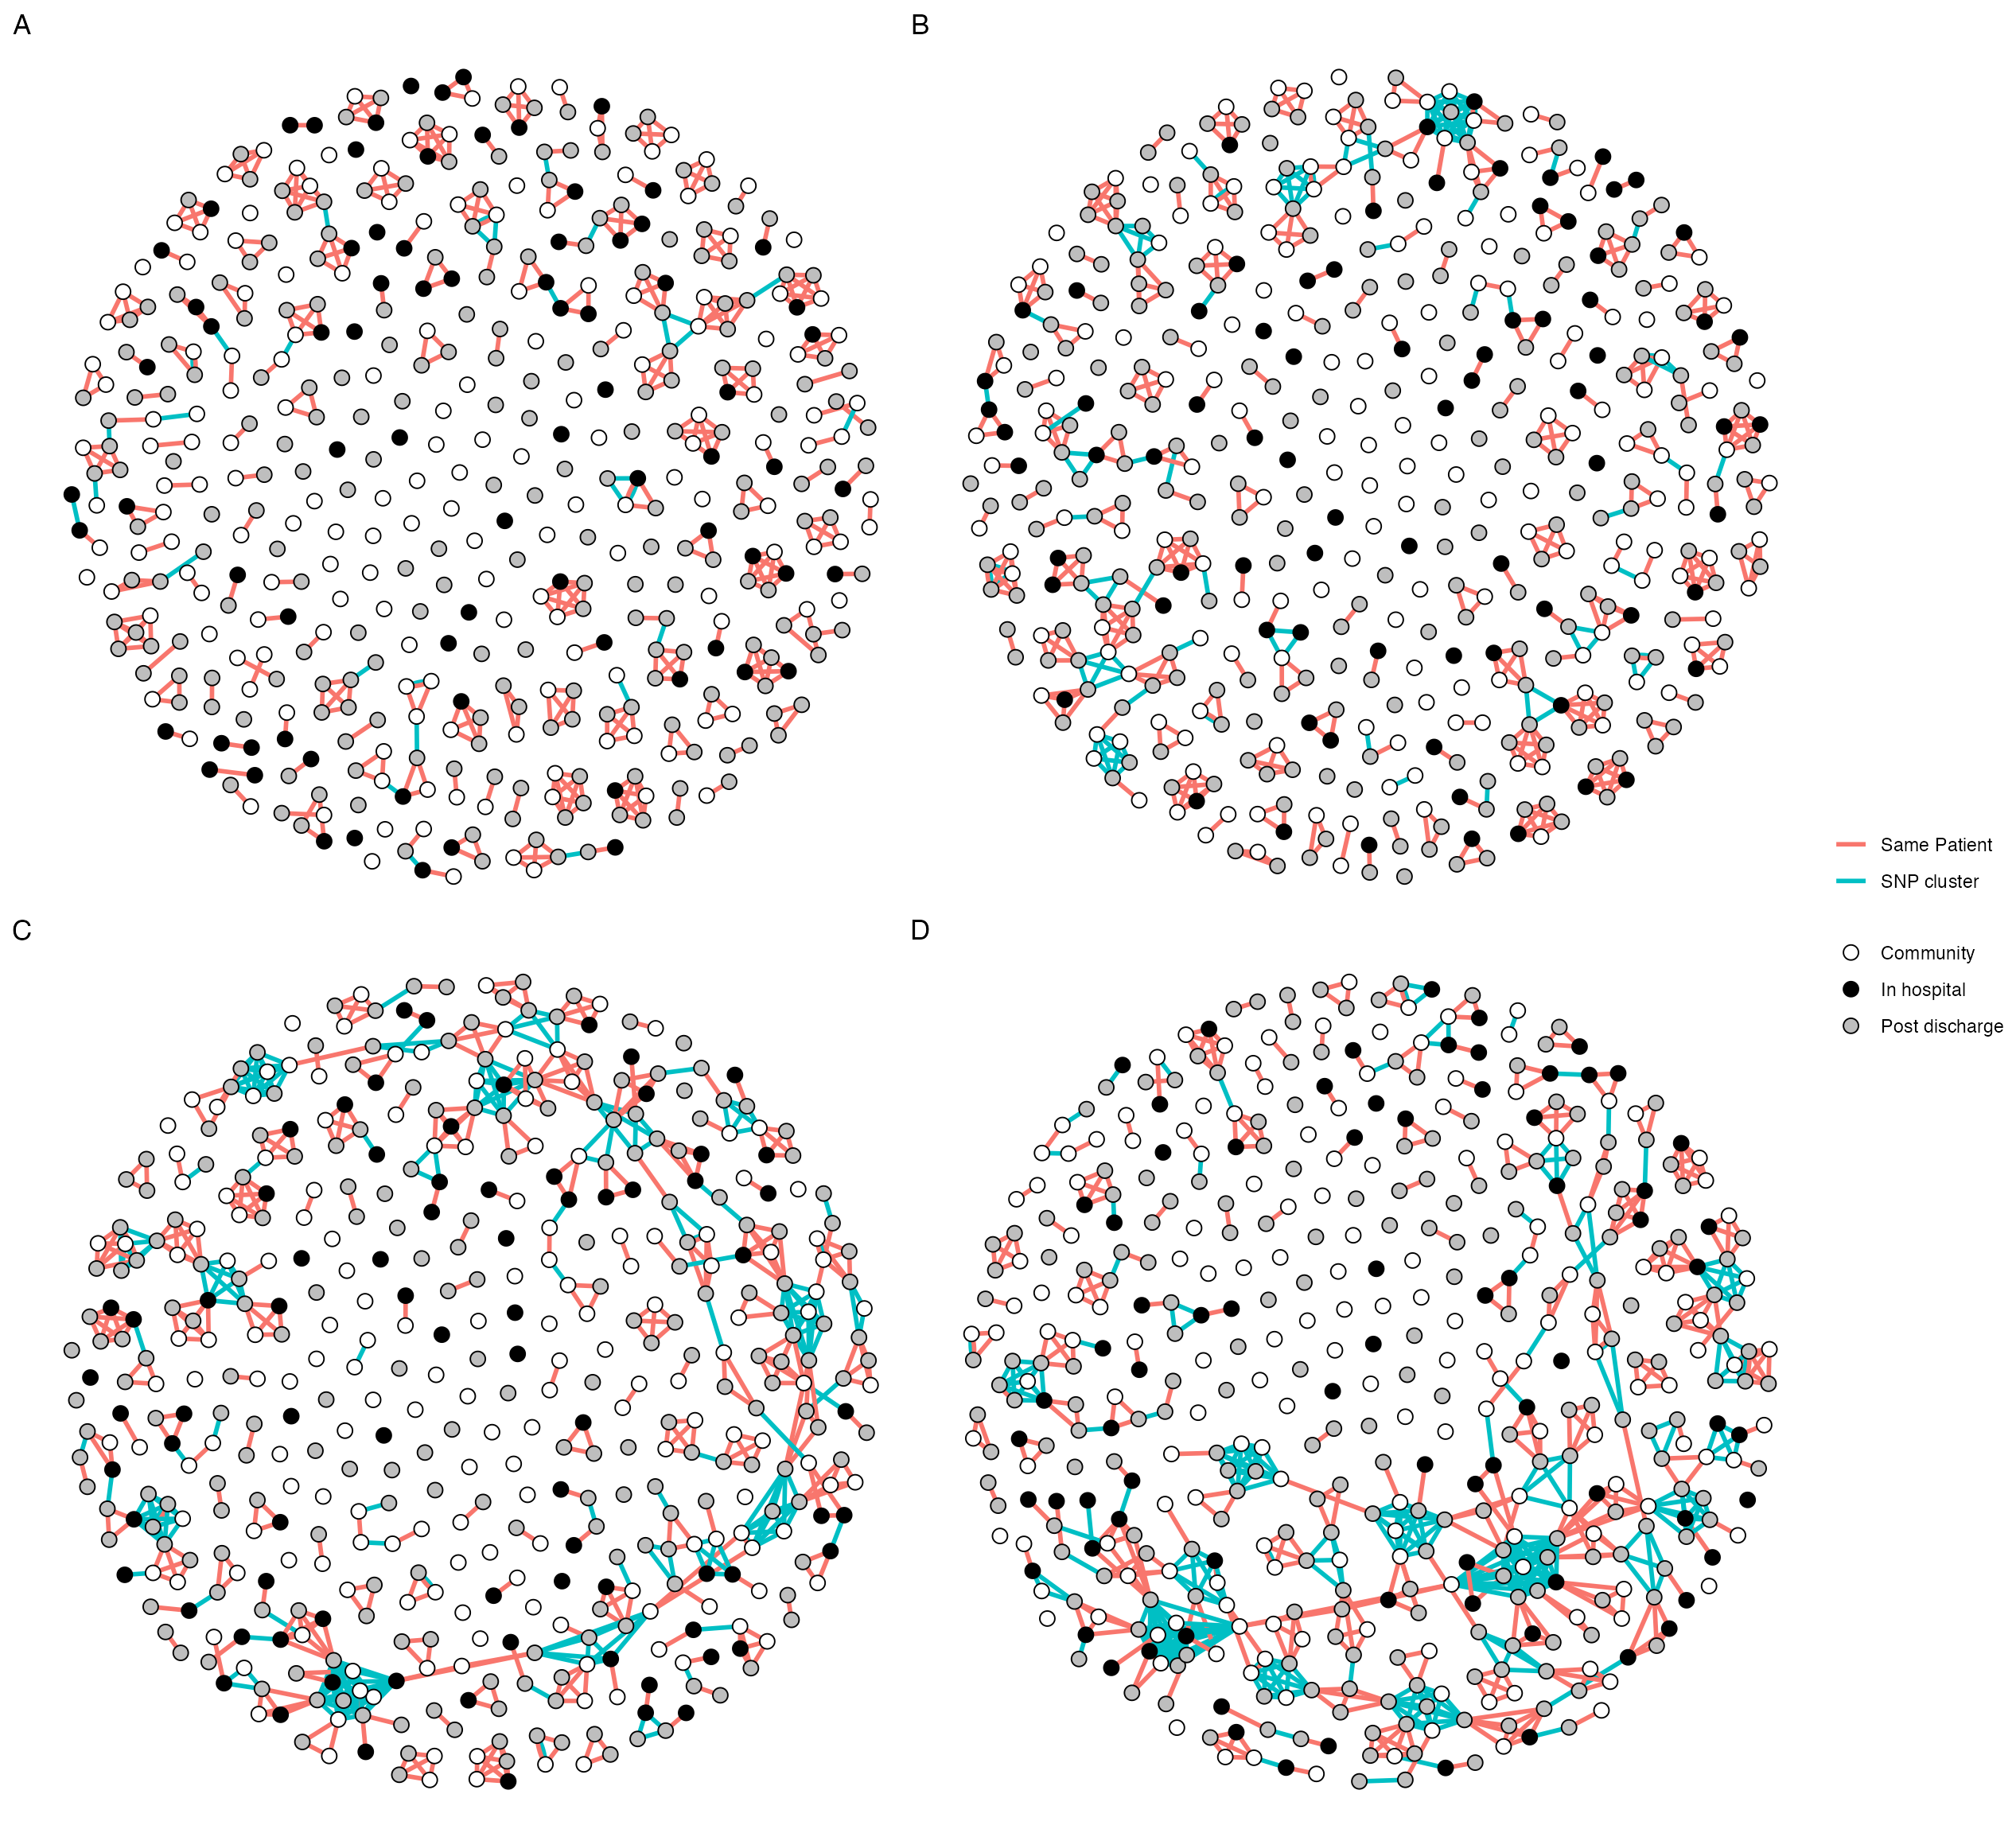 Sensitivity analysis of network plot of putative transmission clusters for E. coli, allowing the definition of a SNP-cluster to vary from 0 (A), to 3 (B), 7 (C), or 10 (D). Points are samples, coloured by place of isolation (in-hospital [black], community [white], or up to 120 days post-discharge [grey]). Red lines link samples that are within a single participant. Blue lines link samples that are differ by the given SNP threshold.